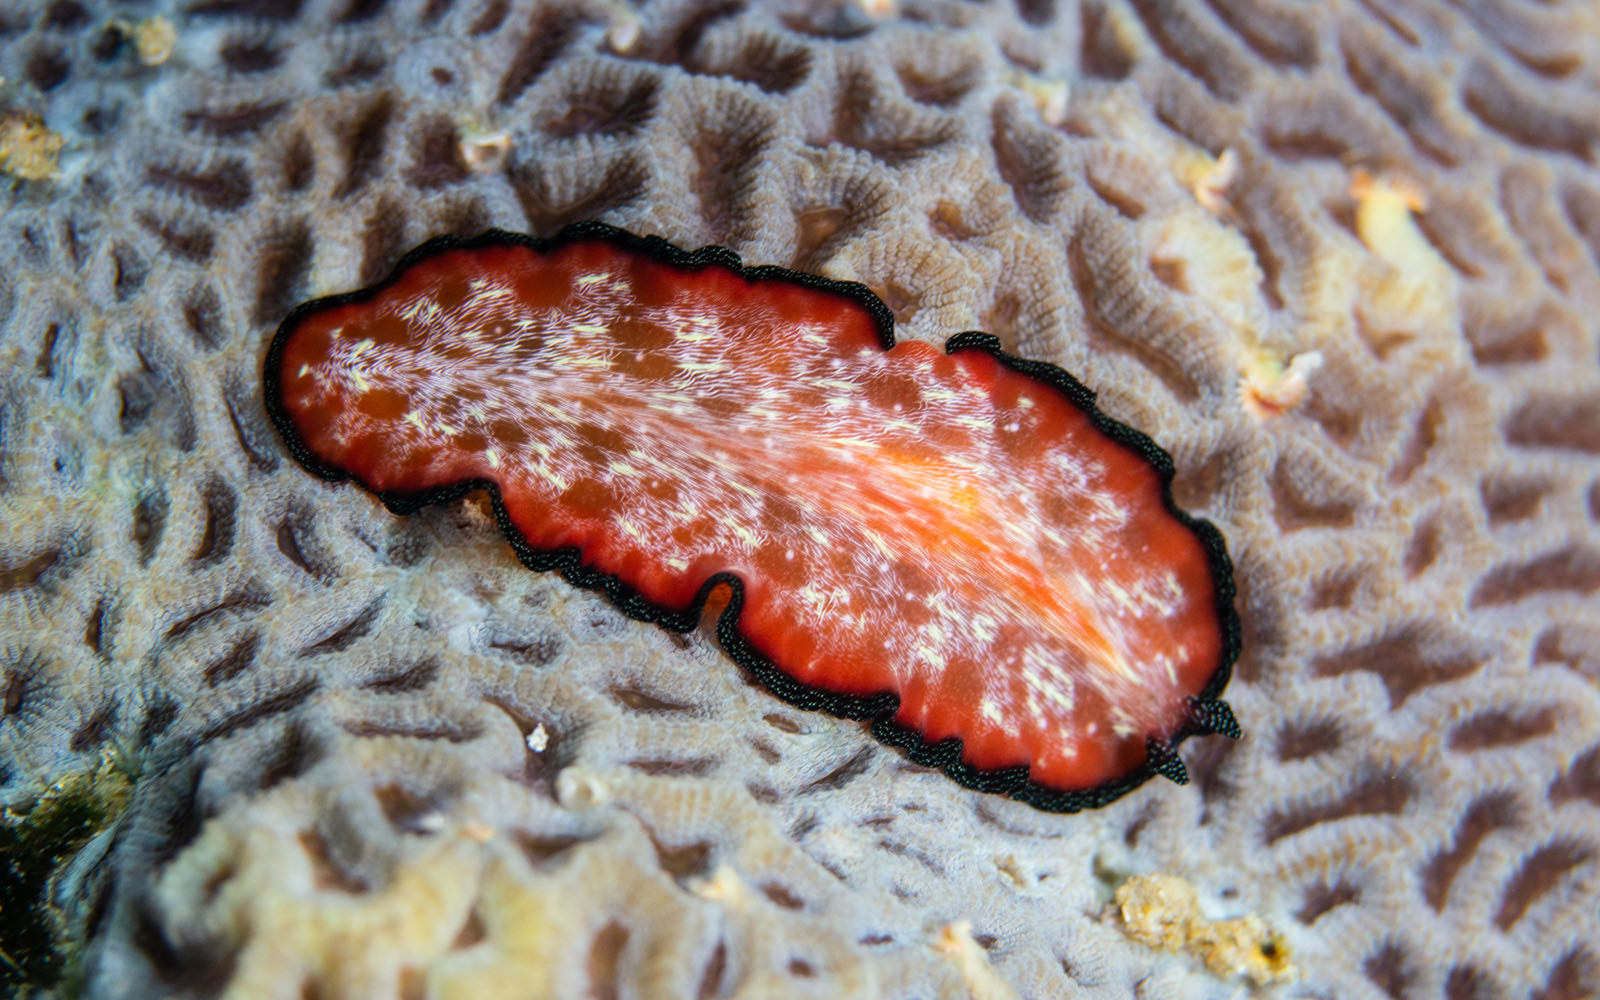 A flatworm photographed by Snorkel Vacations on a snorkeling trip to Raja Ampat